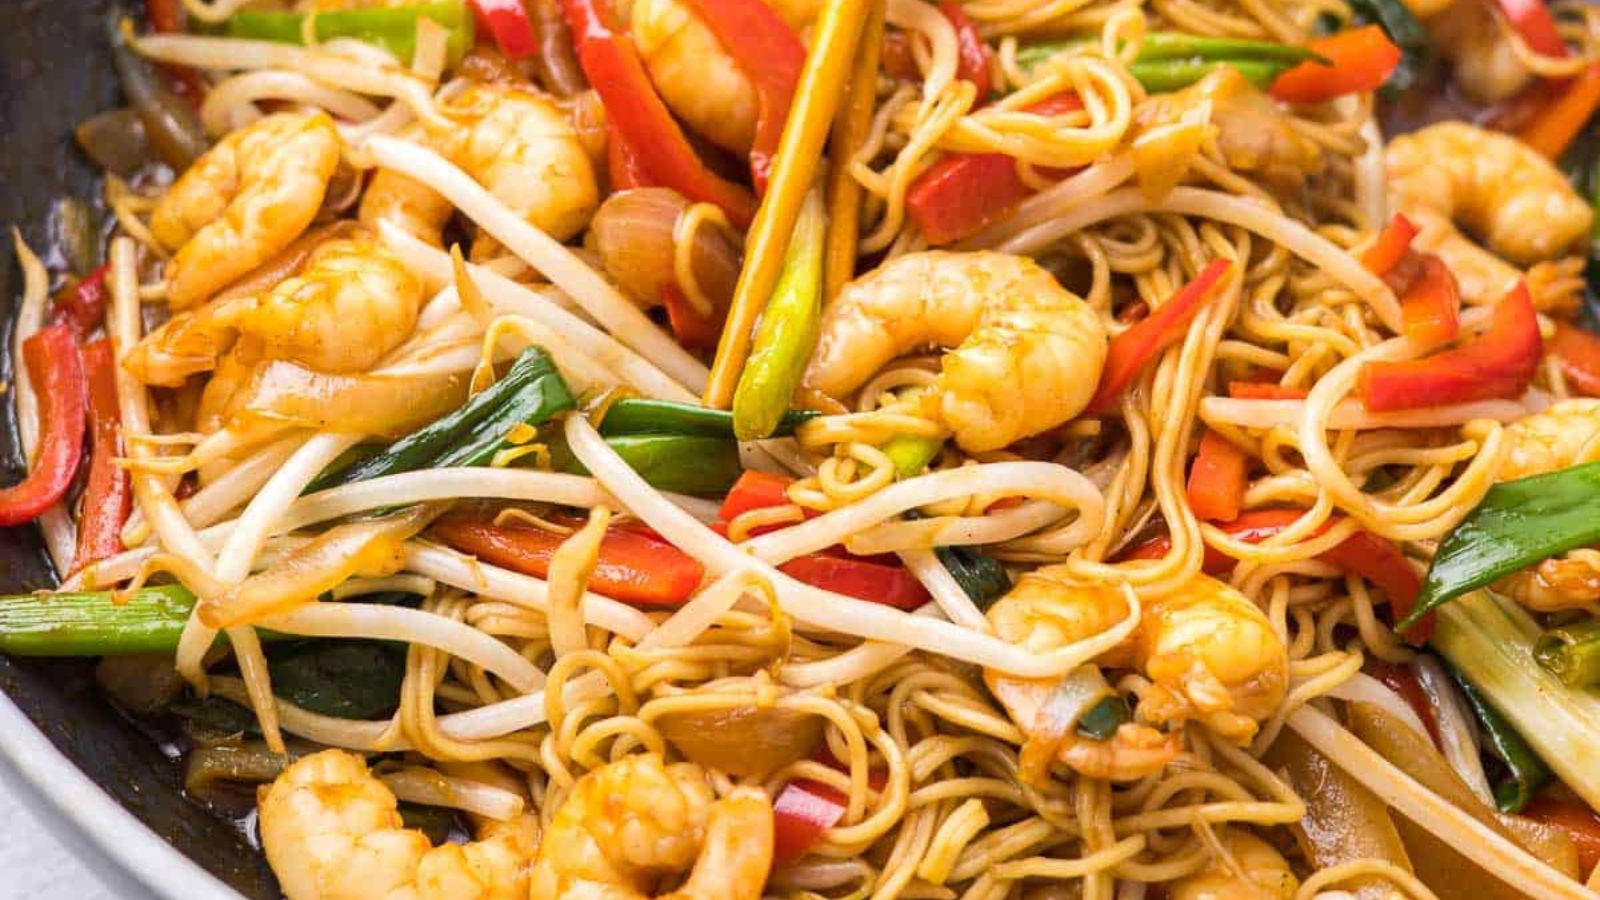 Skip The Takeout With 18 Quick Asian Recipes You Can Make At Home